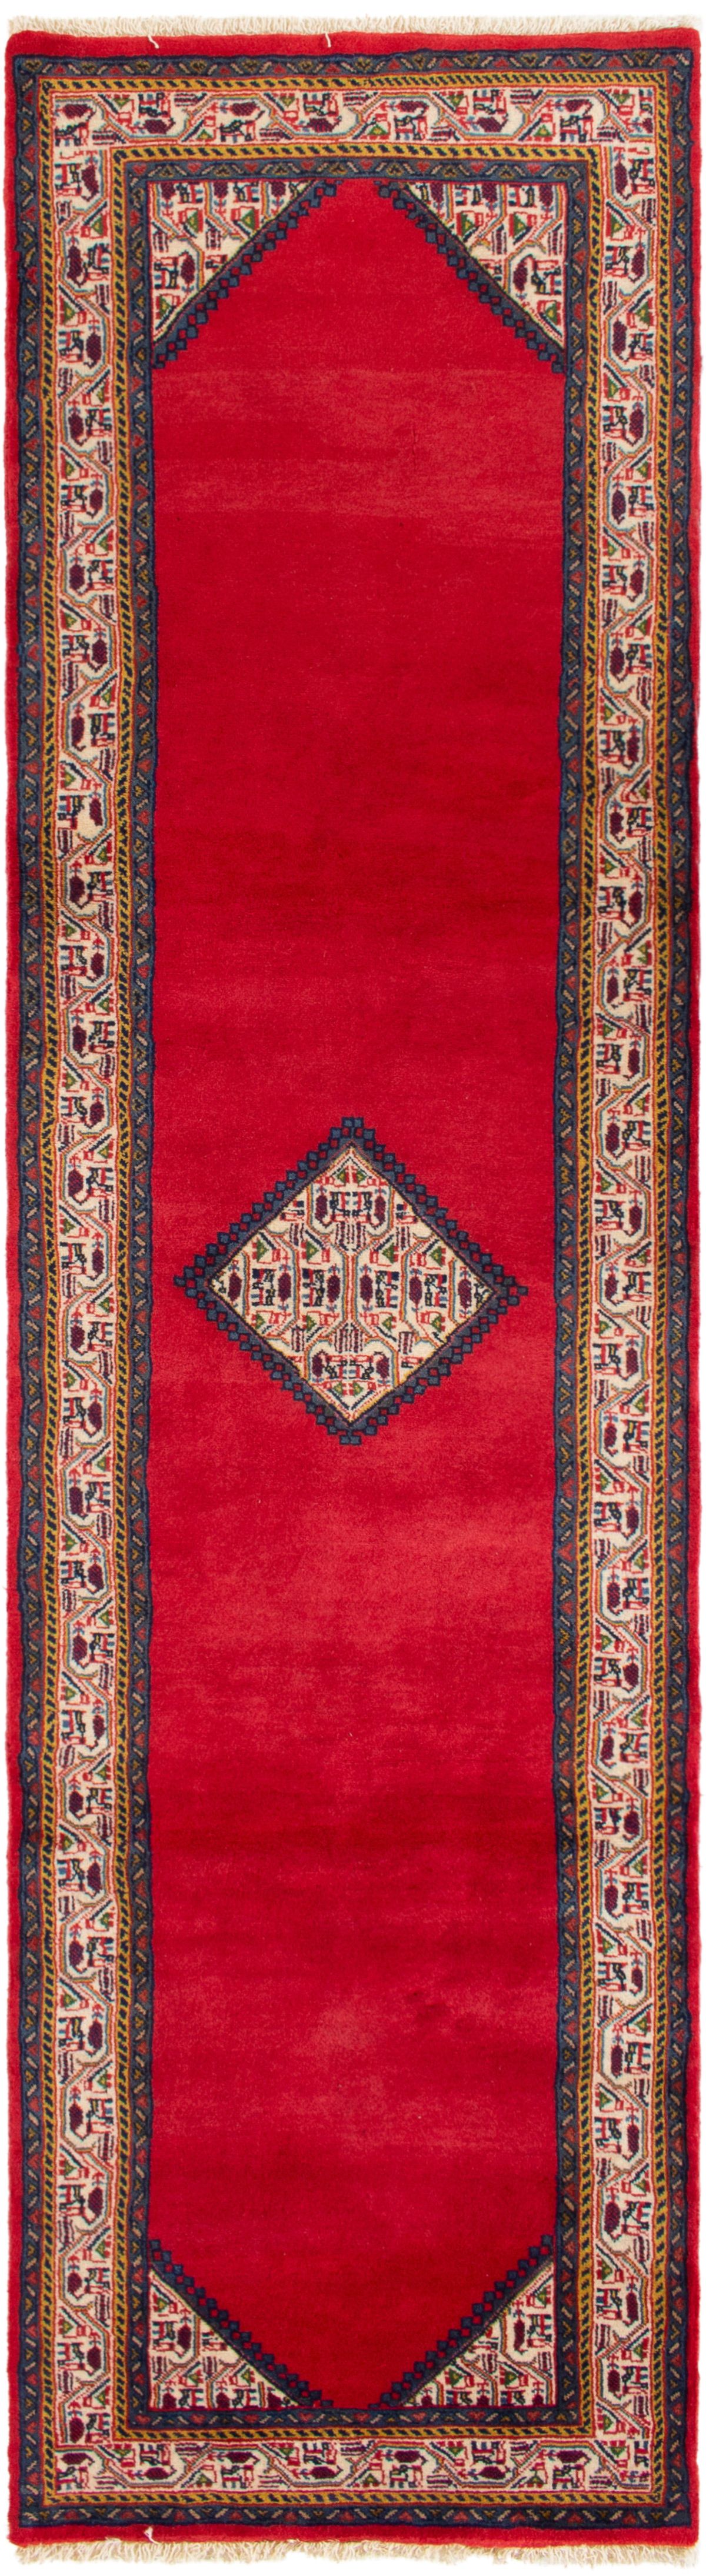 Hand-knotted Sarough  Wool Rug 2'5" x 9'6" Size: 2'5" x 9'6"  